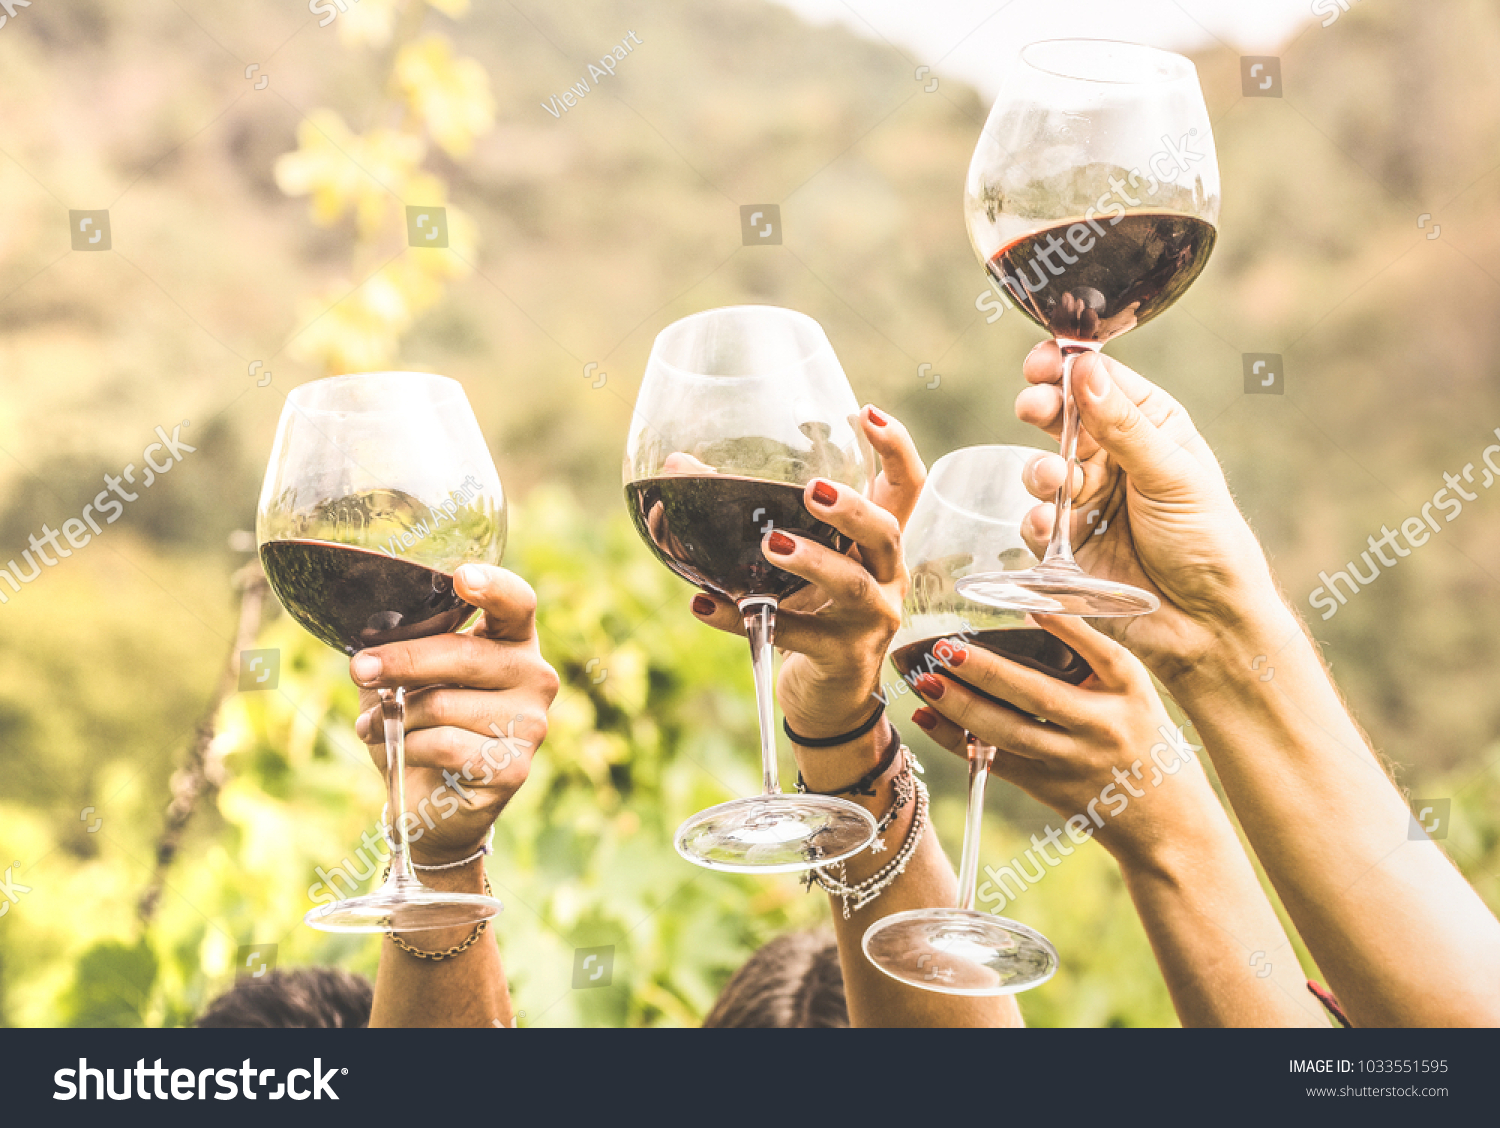 Hands toasting red wine glass and friends having fun cheering at winetasting experience - Young people enjoying harvest time together at farmhouse vineyard countryside - Youth and friendship concept #1033551595